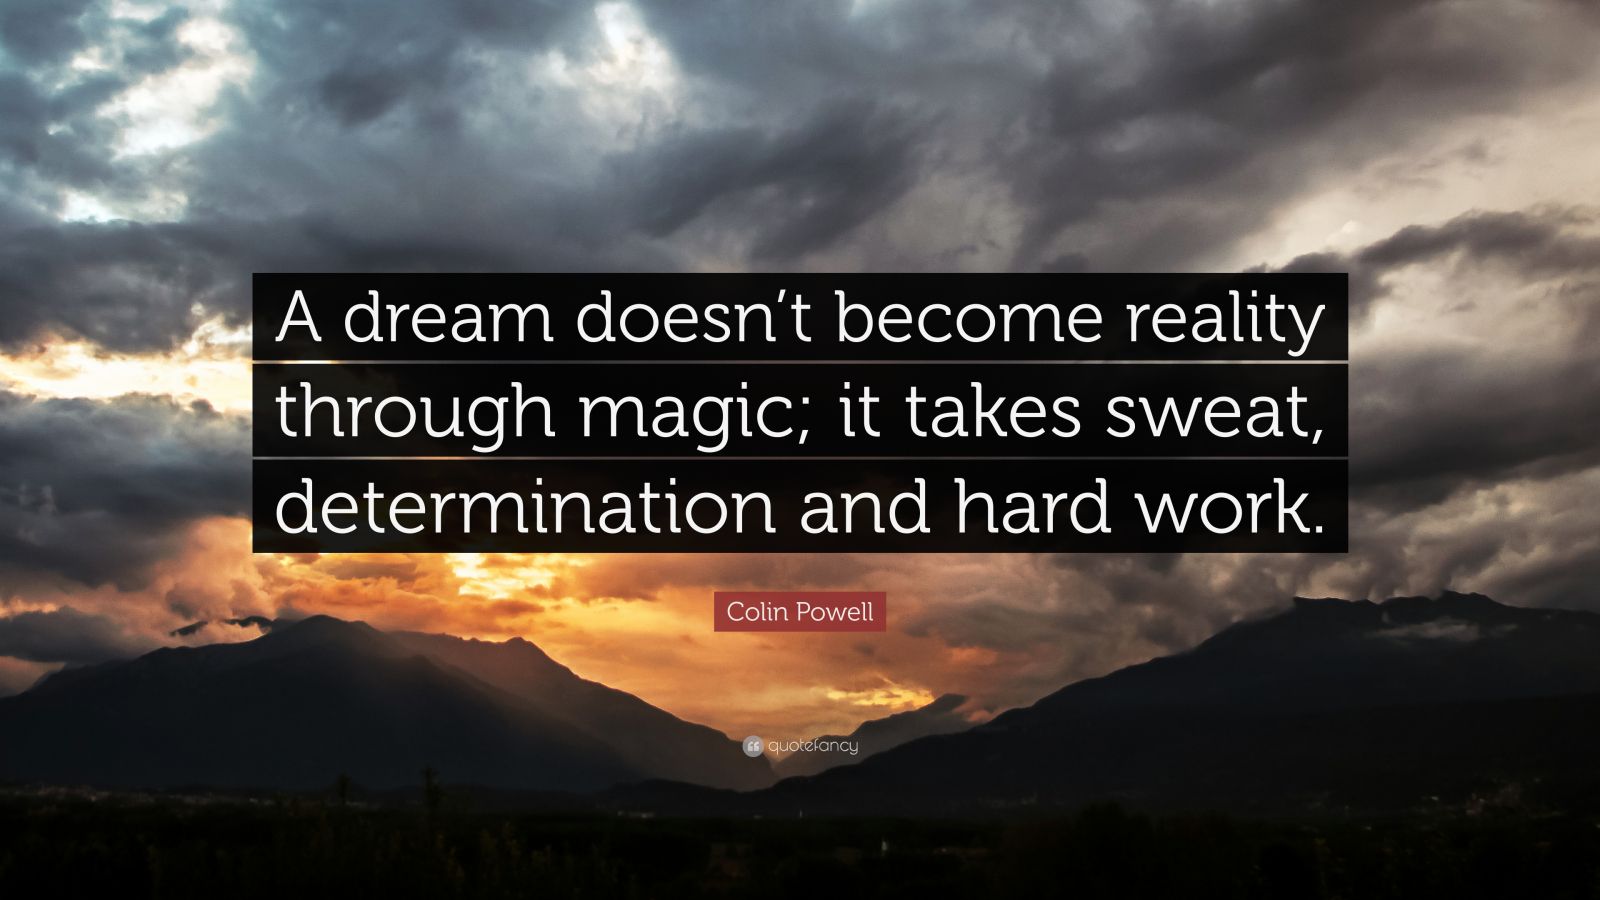 essay on a dream doesn't become reality through magic